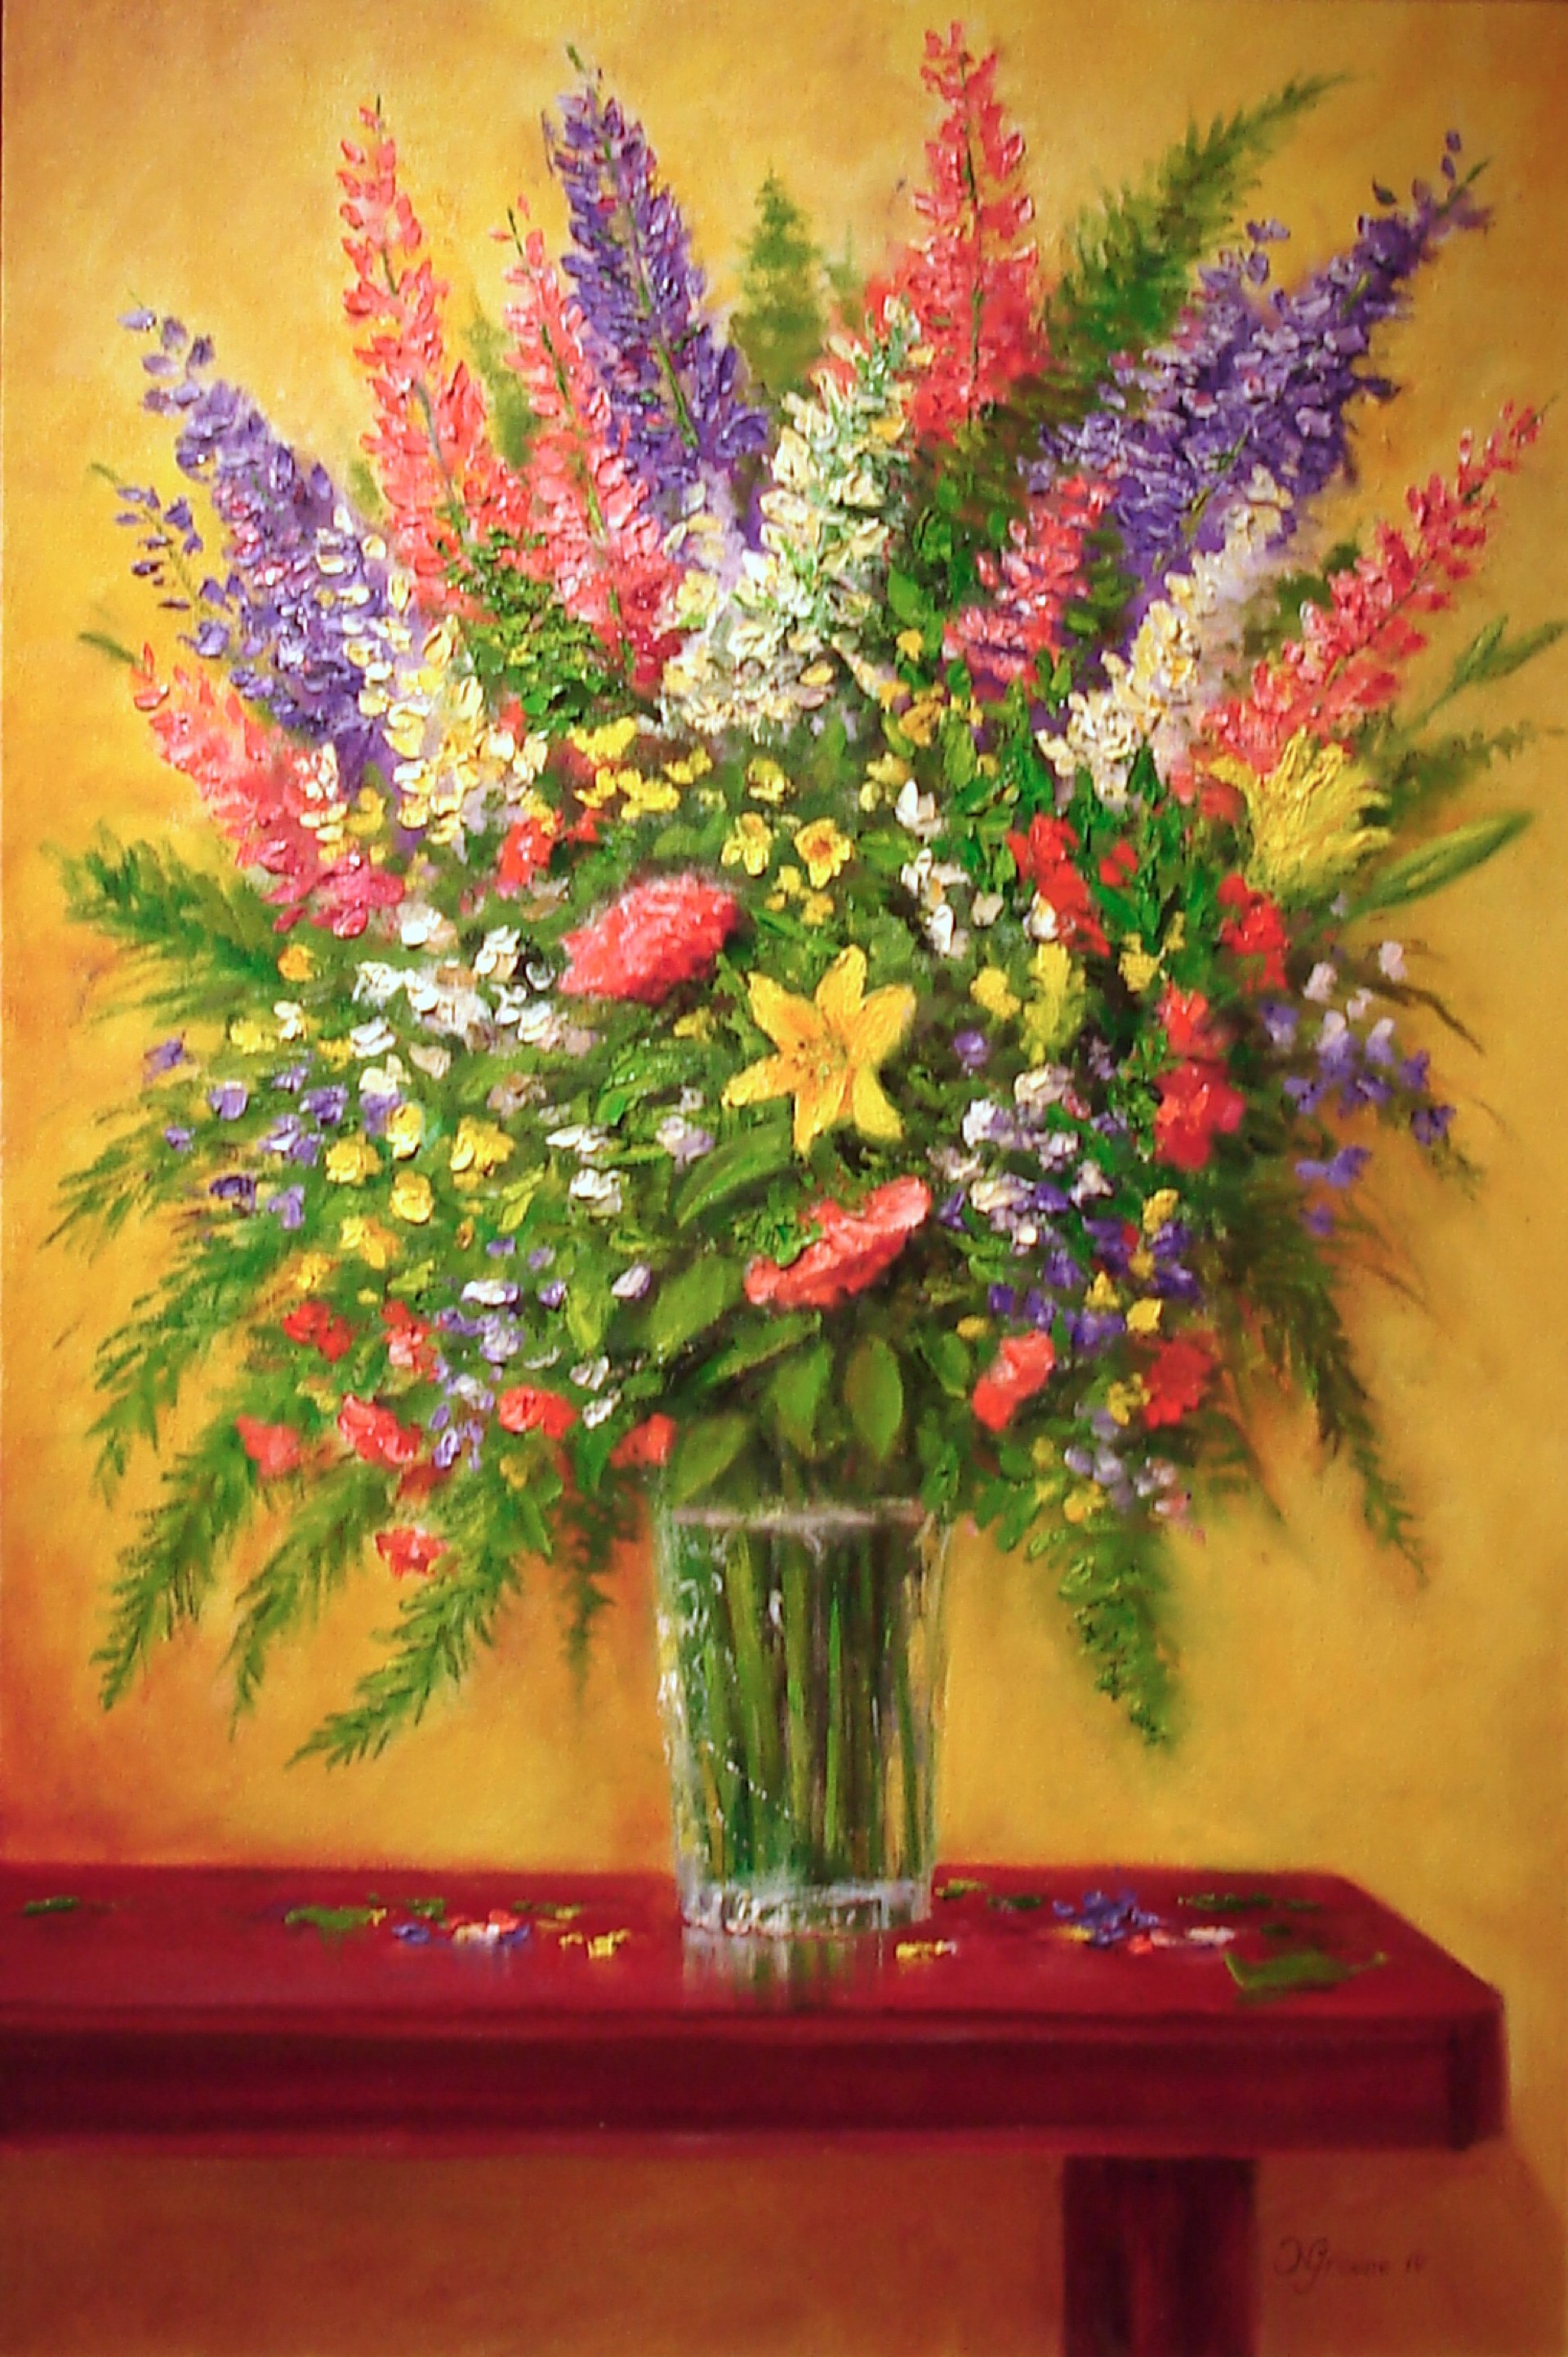 "Lillies & Lupins" by Michael Greene